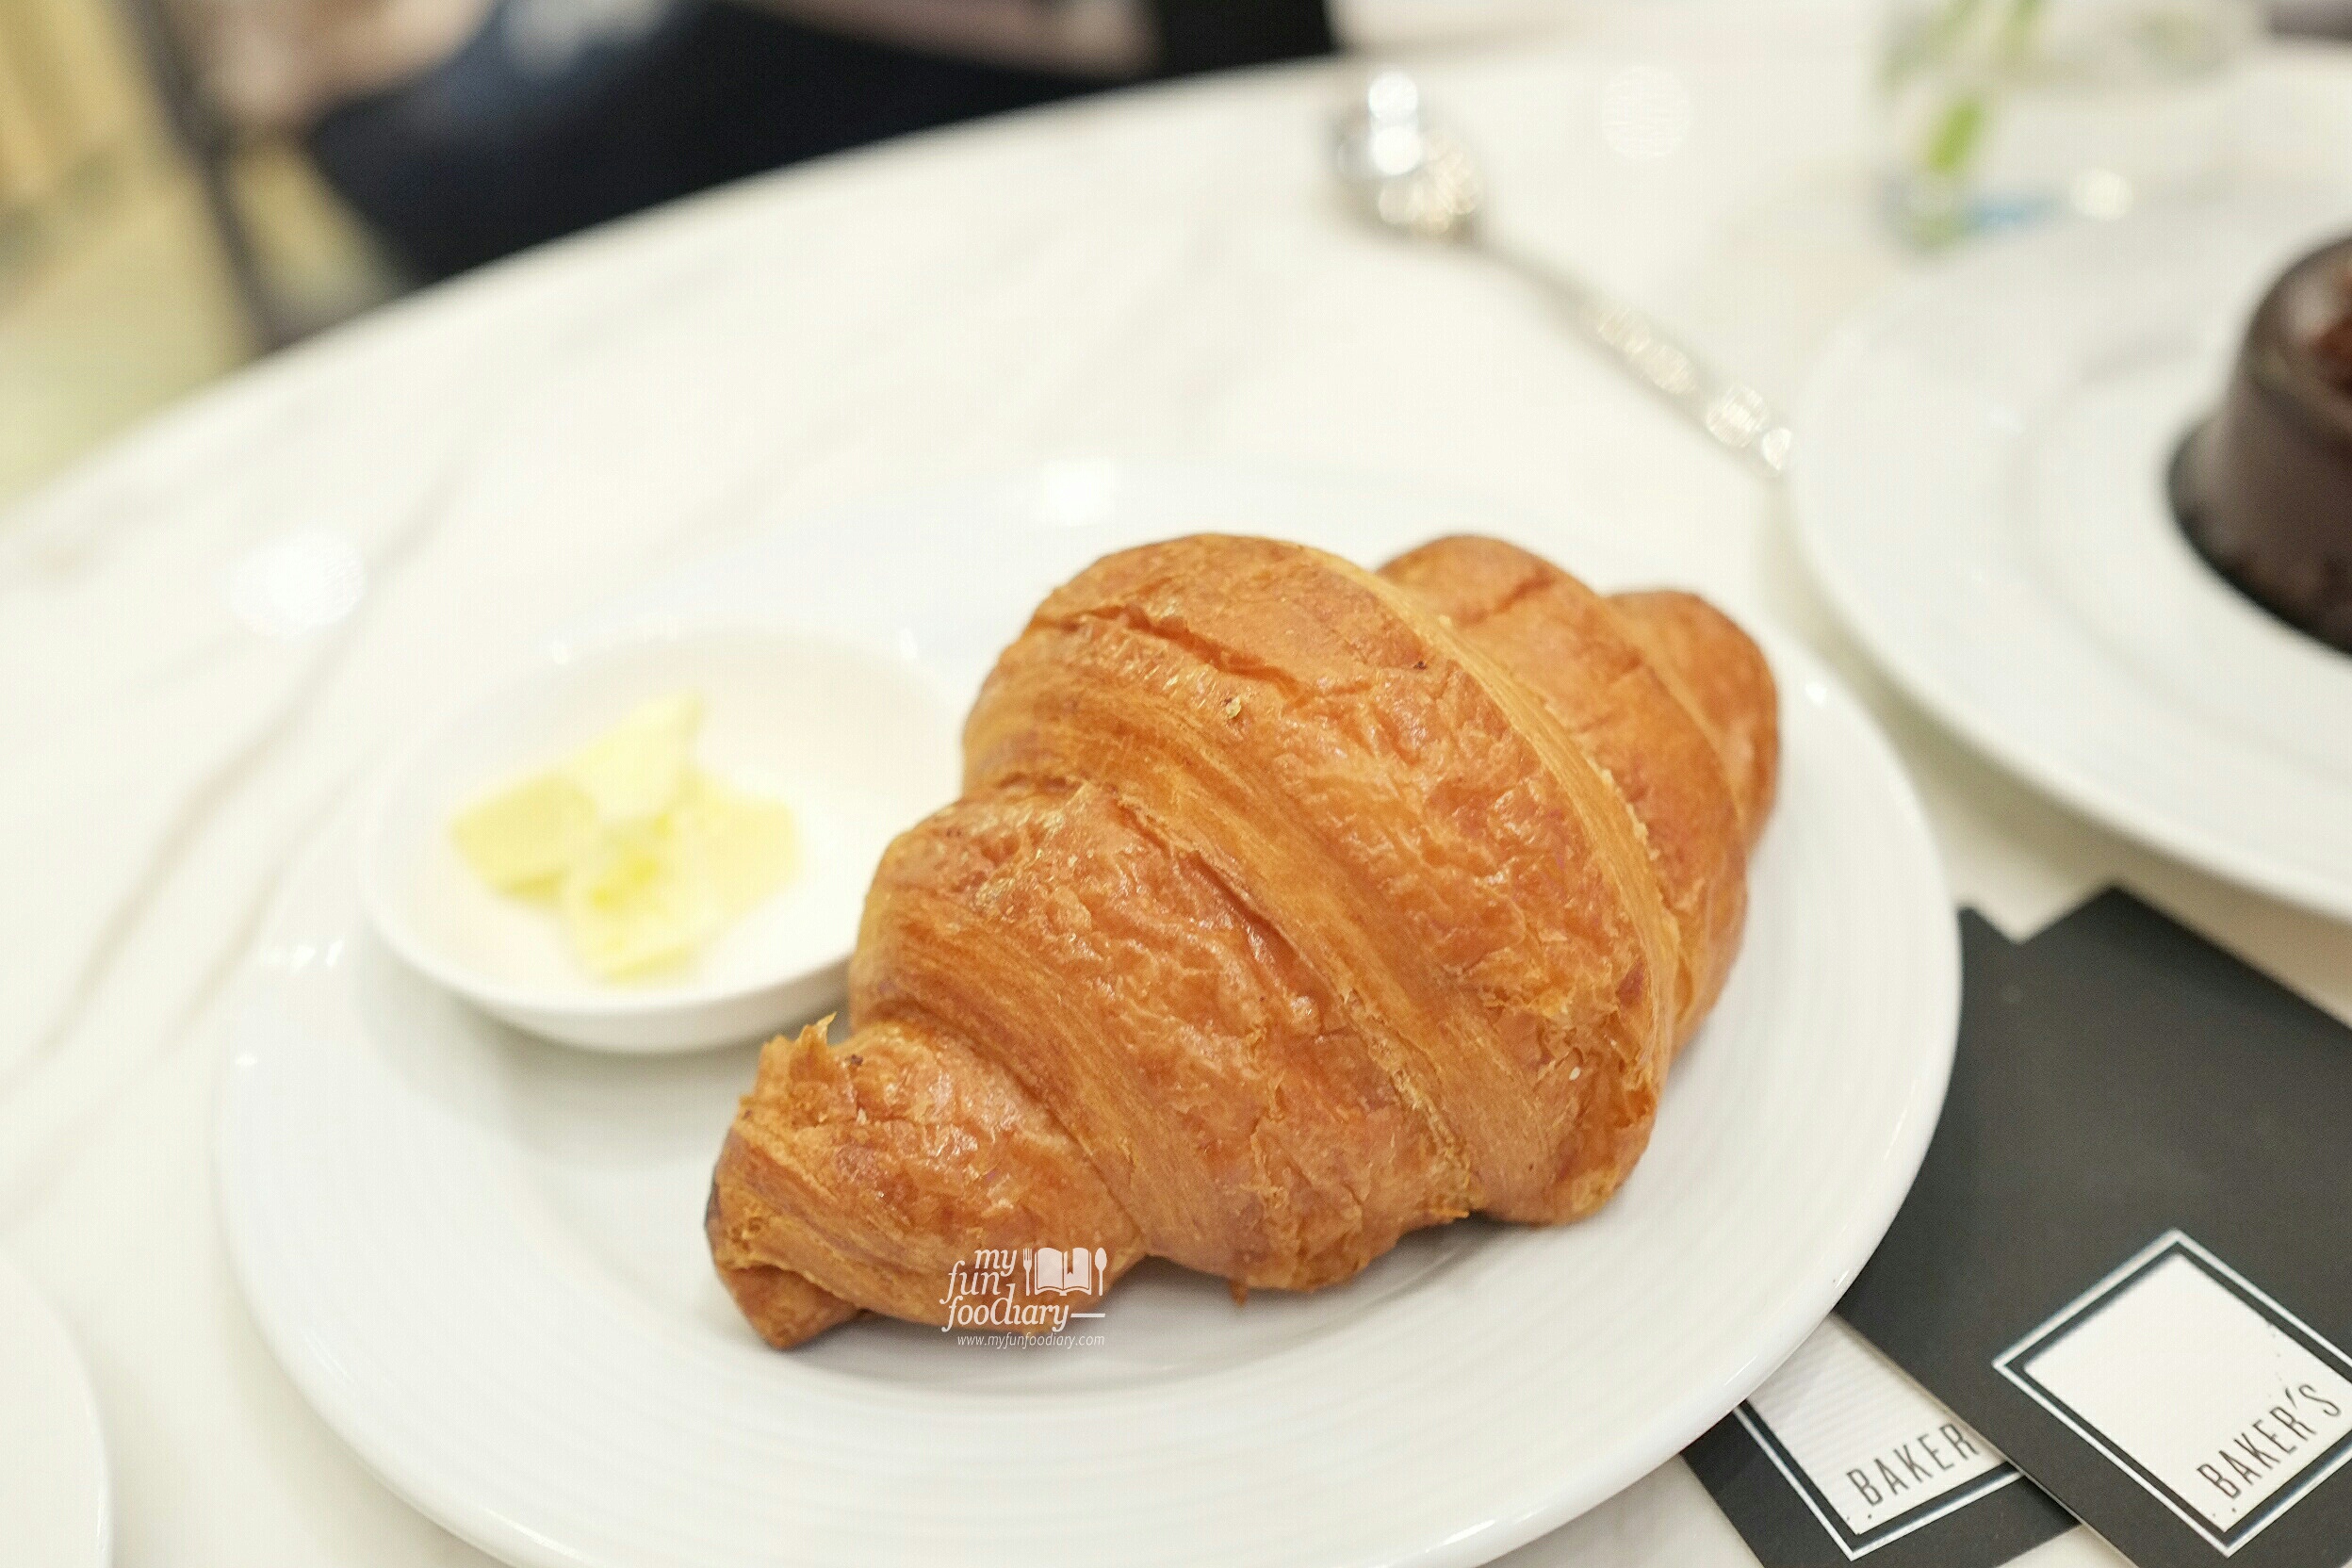 Butter Croissant at Baker's Gallery KoKas by Myfunfoodiary 01